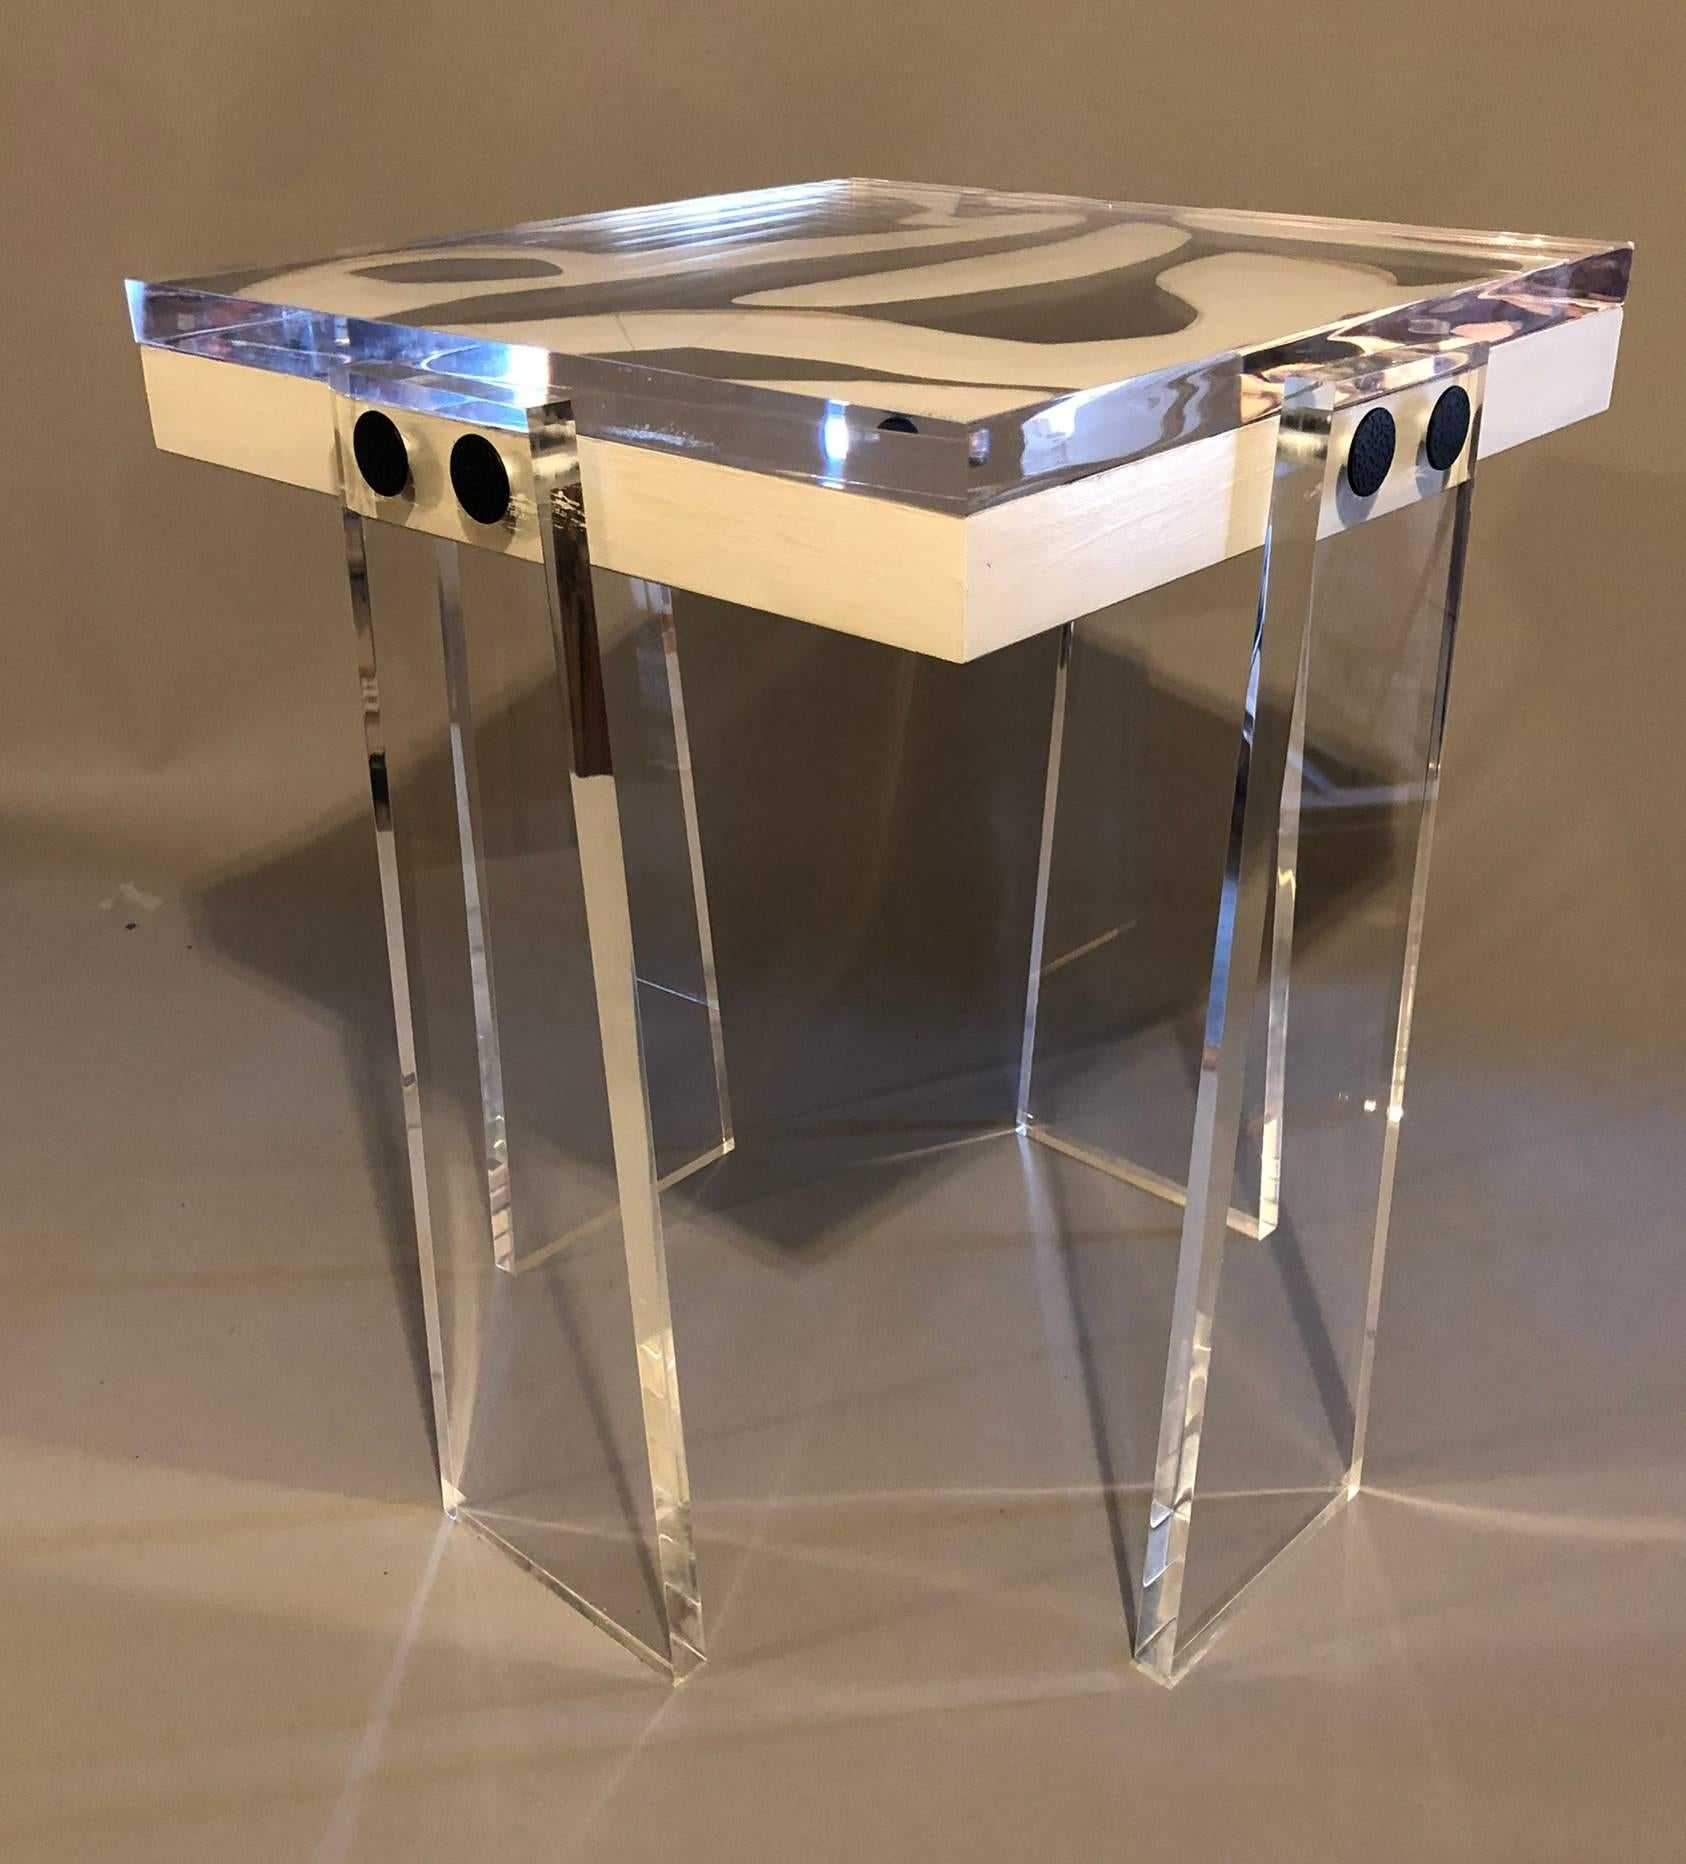 A beautifully handcrafted acrylic table with original signed artwork created by known artist Steve McElroy. Top measures 16 x 16 inches and legs are 25 inches tall. Legs may be requested custom any height at no extra charge. Top is 1 inch acrylic,